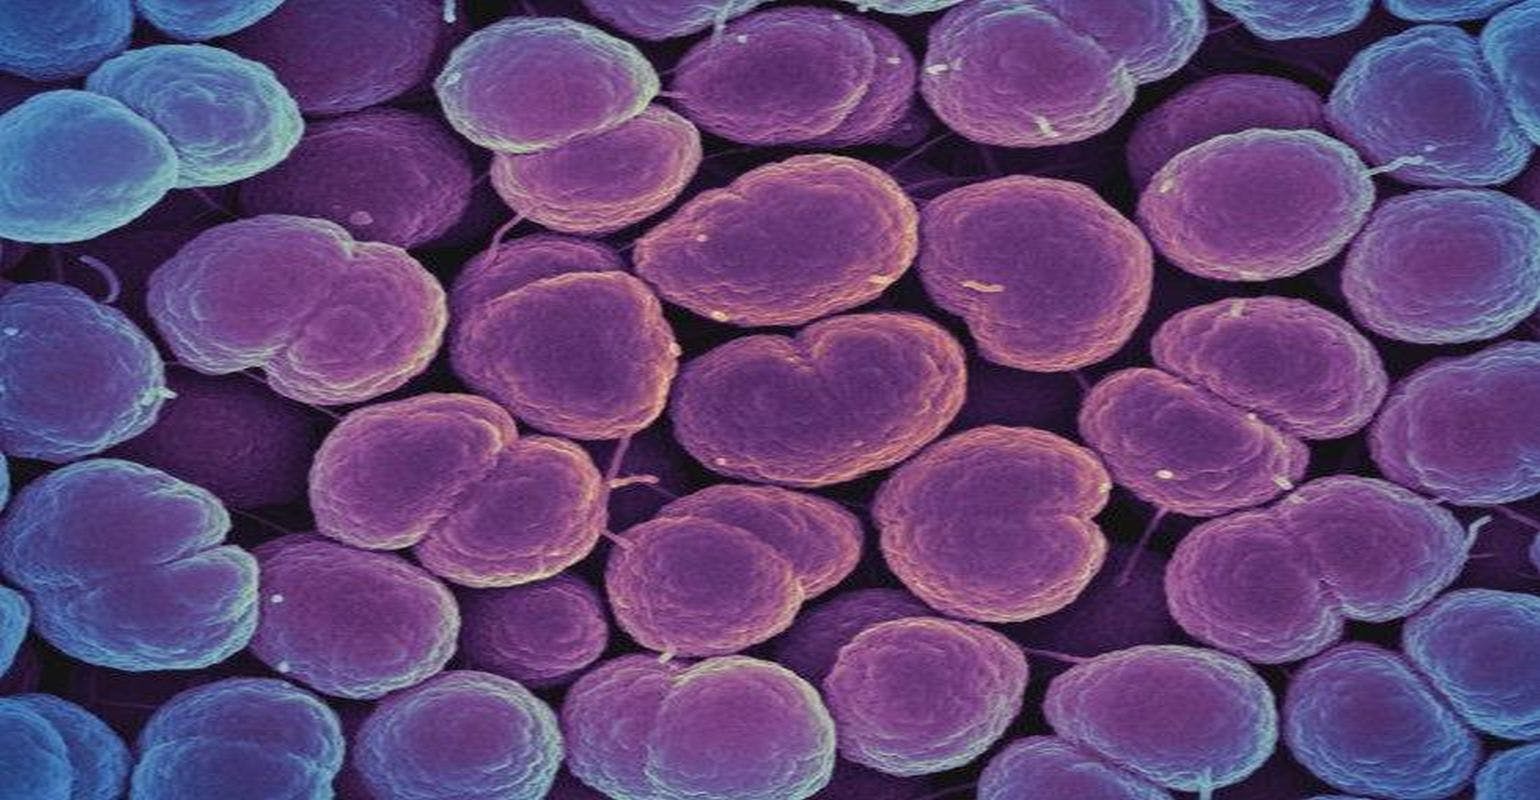 Study Finds New Single-Dose Antibiotic Safe and Effective for Uncomplicated Gonorrhea